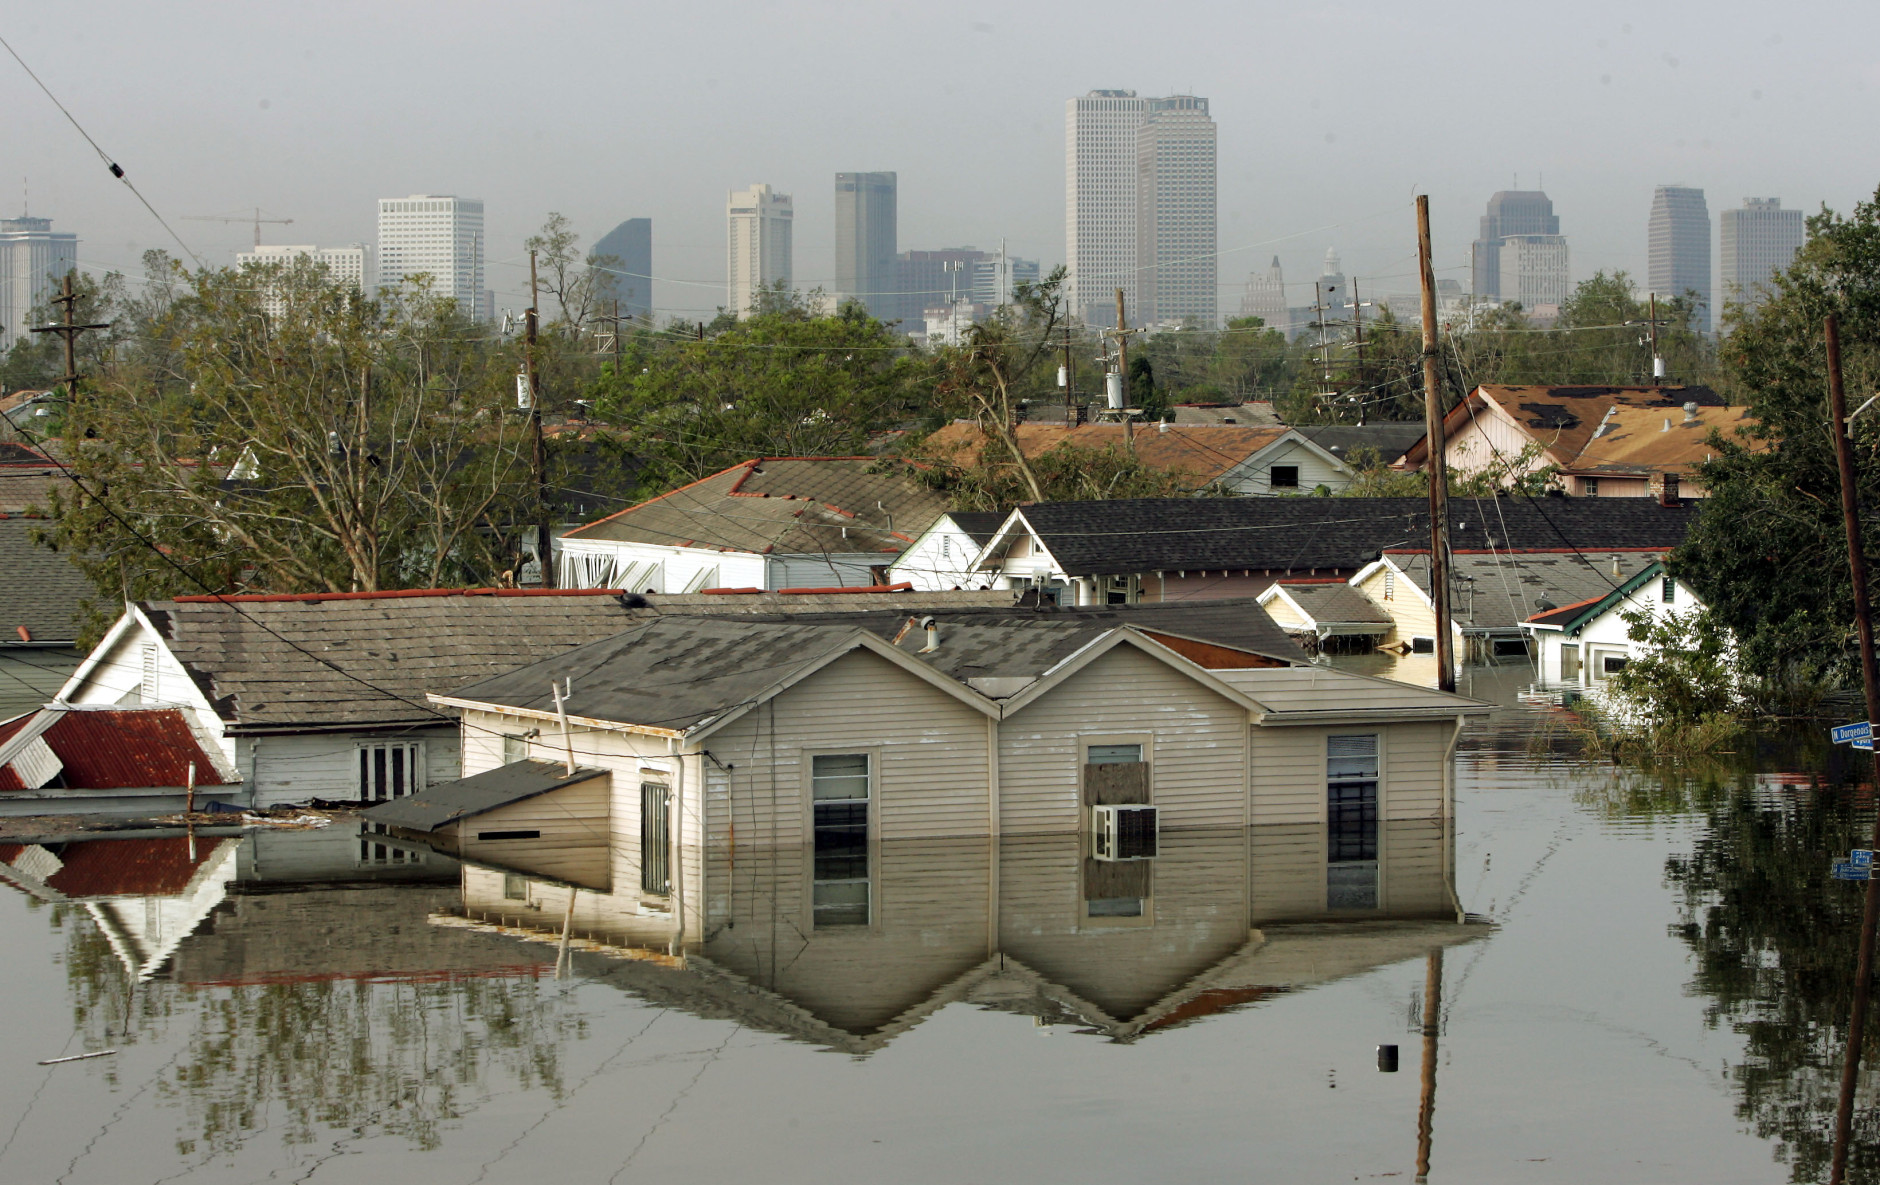 Houses in New Orleans 8th Ward are surrounded by water in the flooded city of New Orleans on Tuesday, Aug. 30, 2005. Water continues to rise after the onslaught of Hurricane Katrina which pounded the coast on Monday. (AP Photo/Dave Martin)